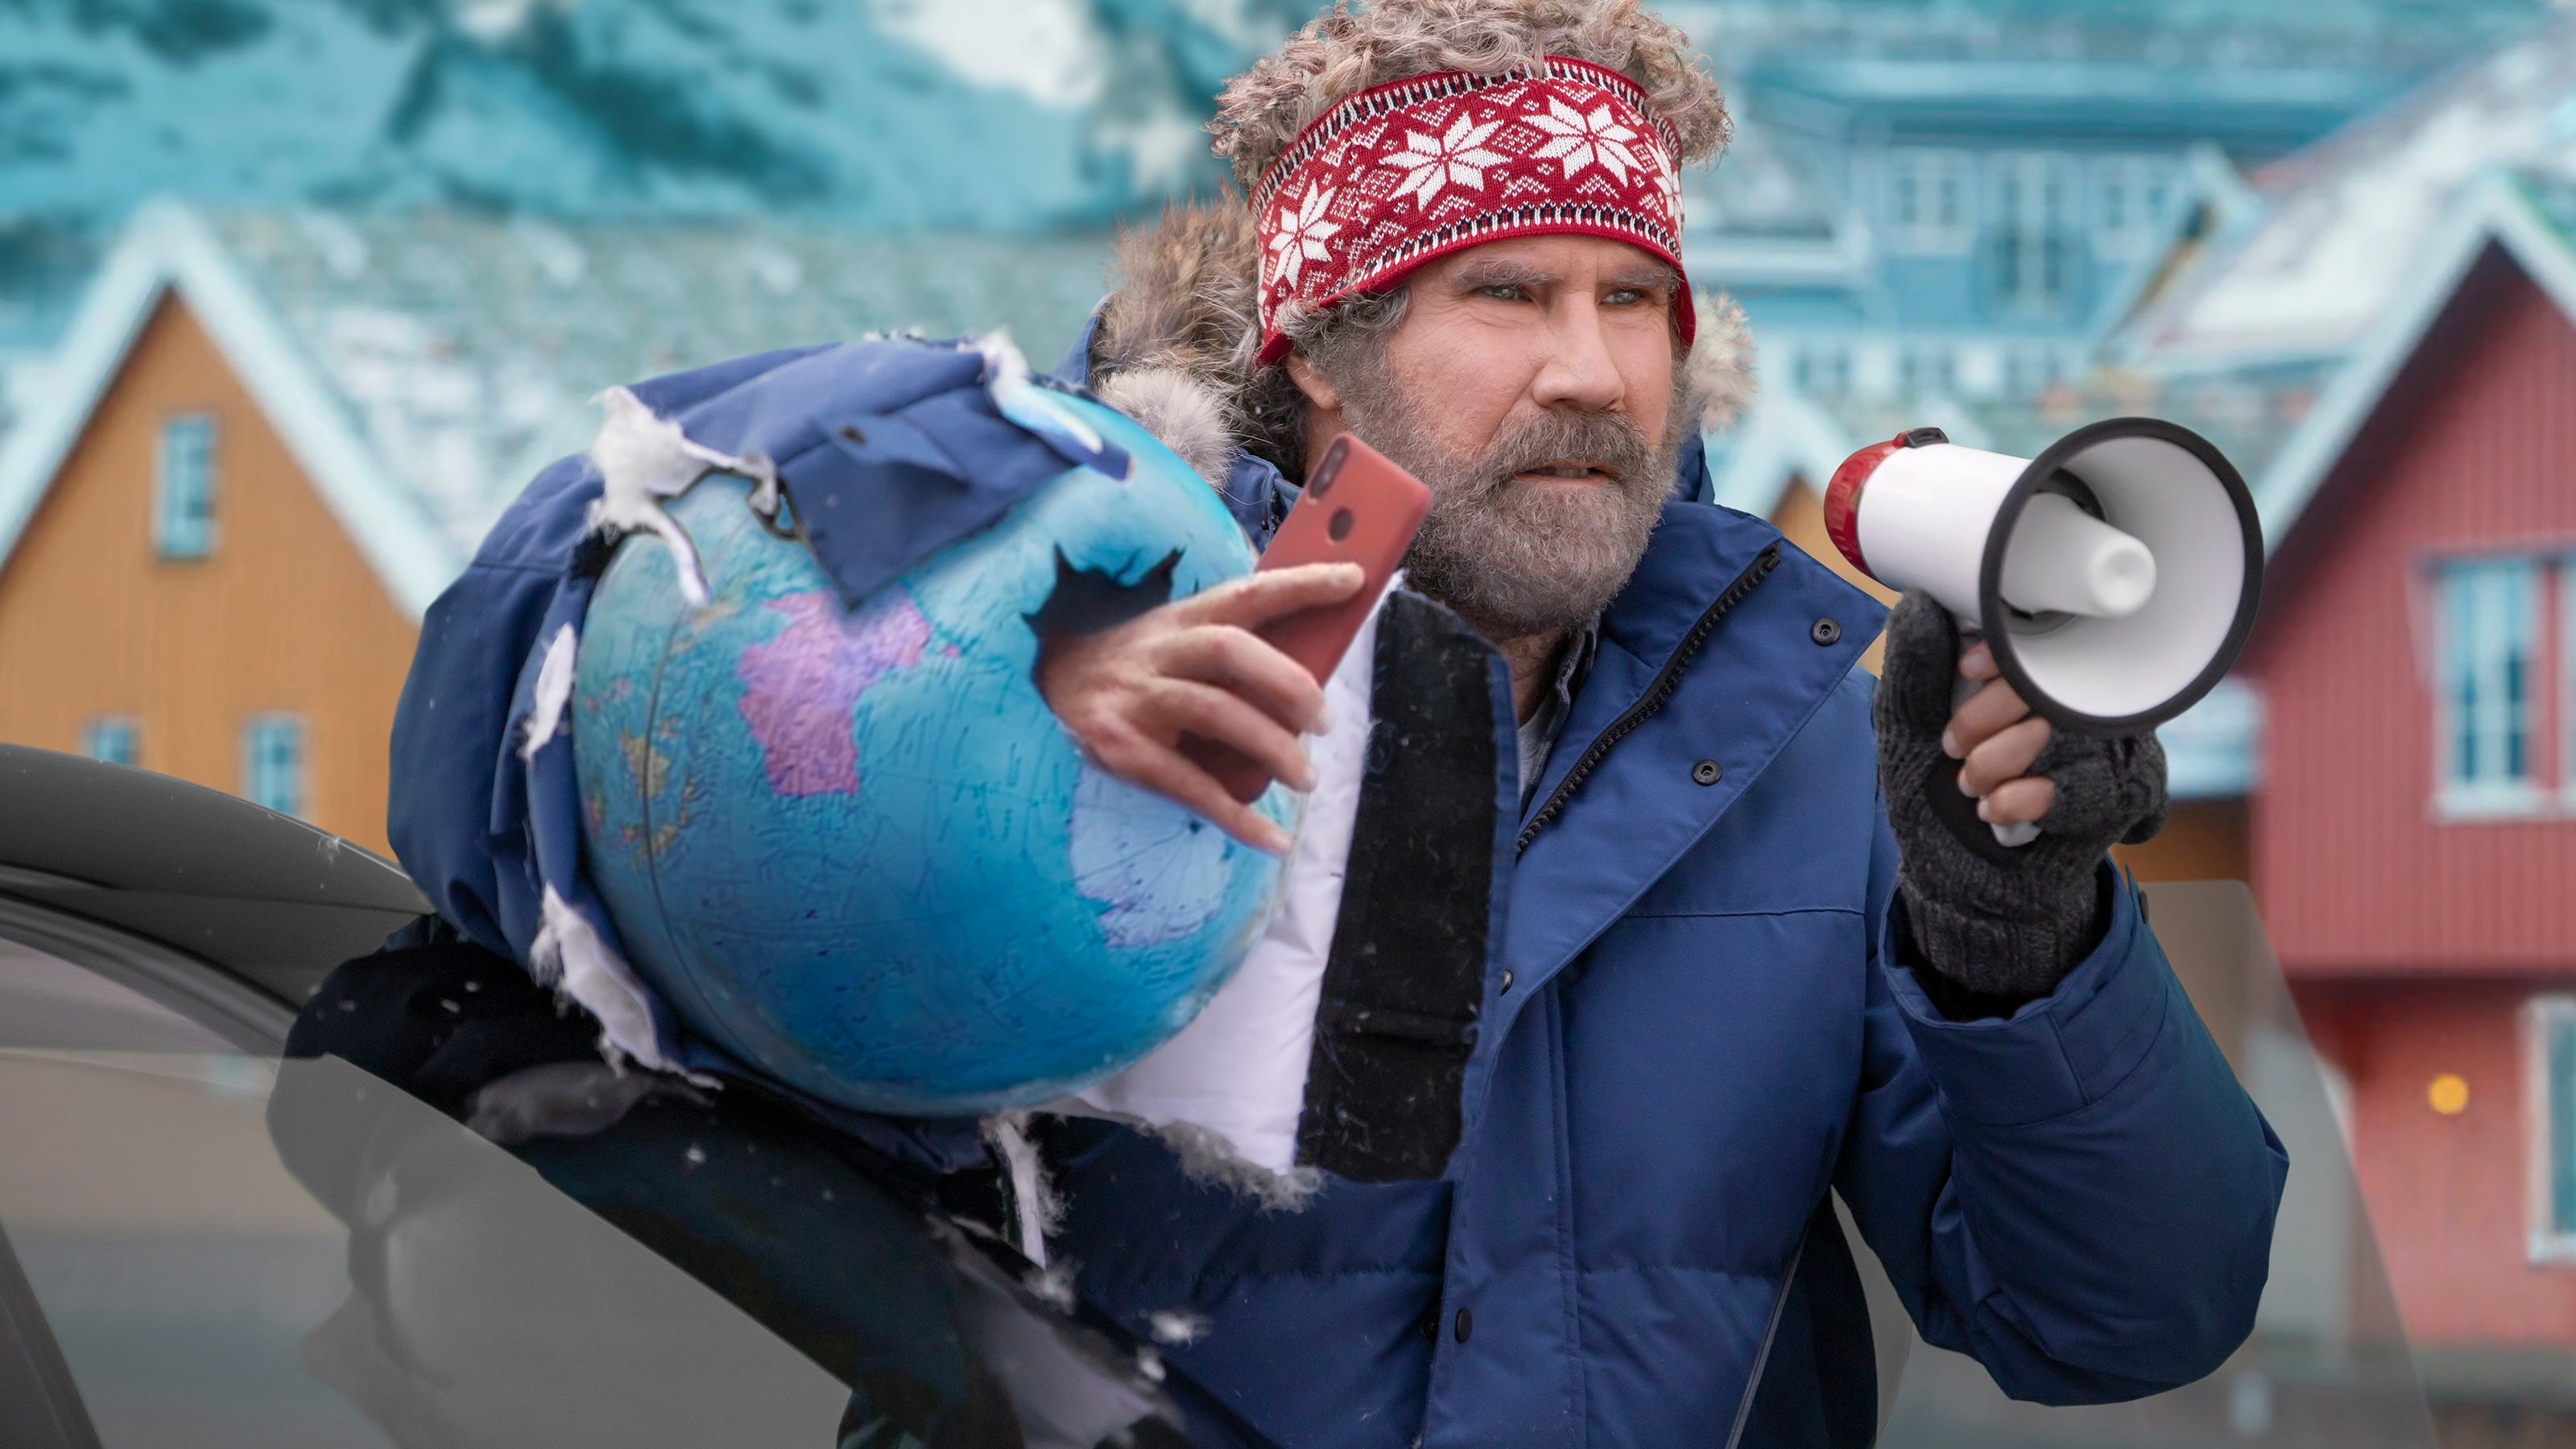 Will Ferrell hates Norway in Super Bowl commercial for General Motors